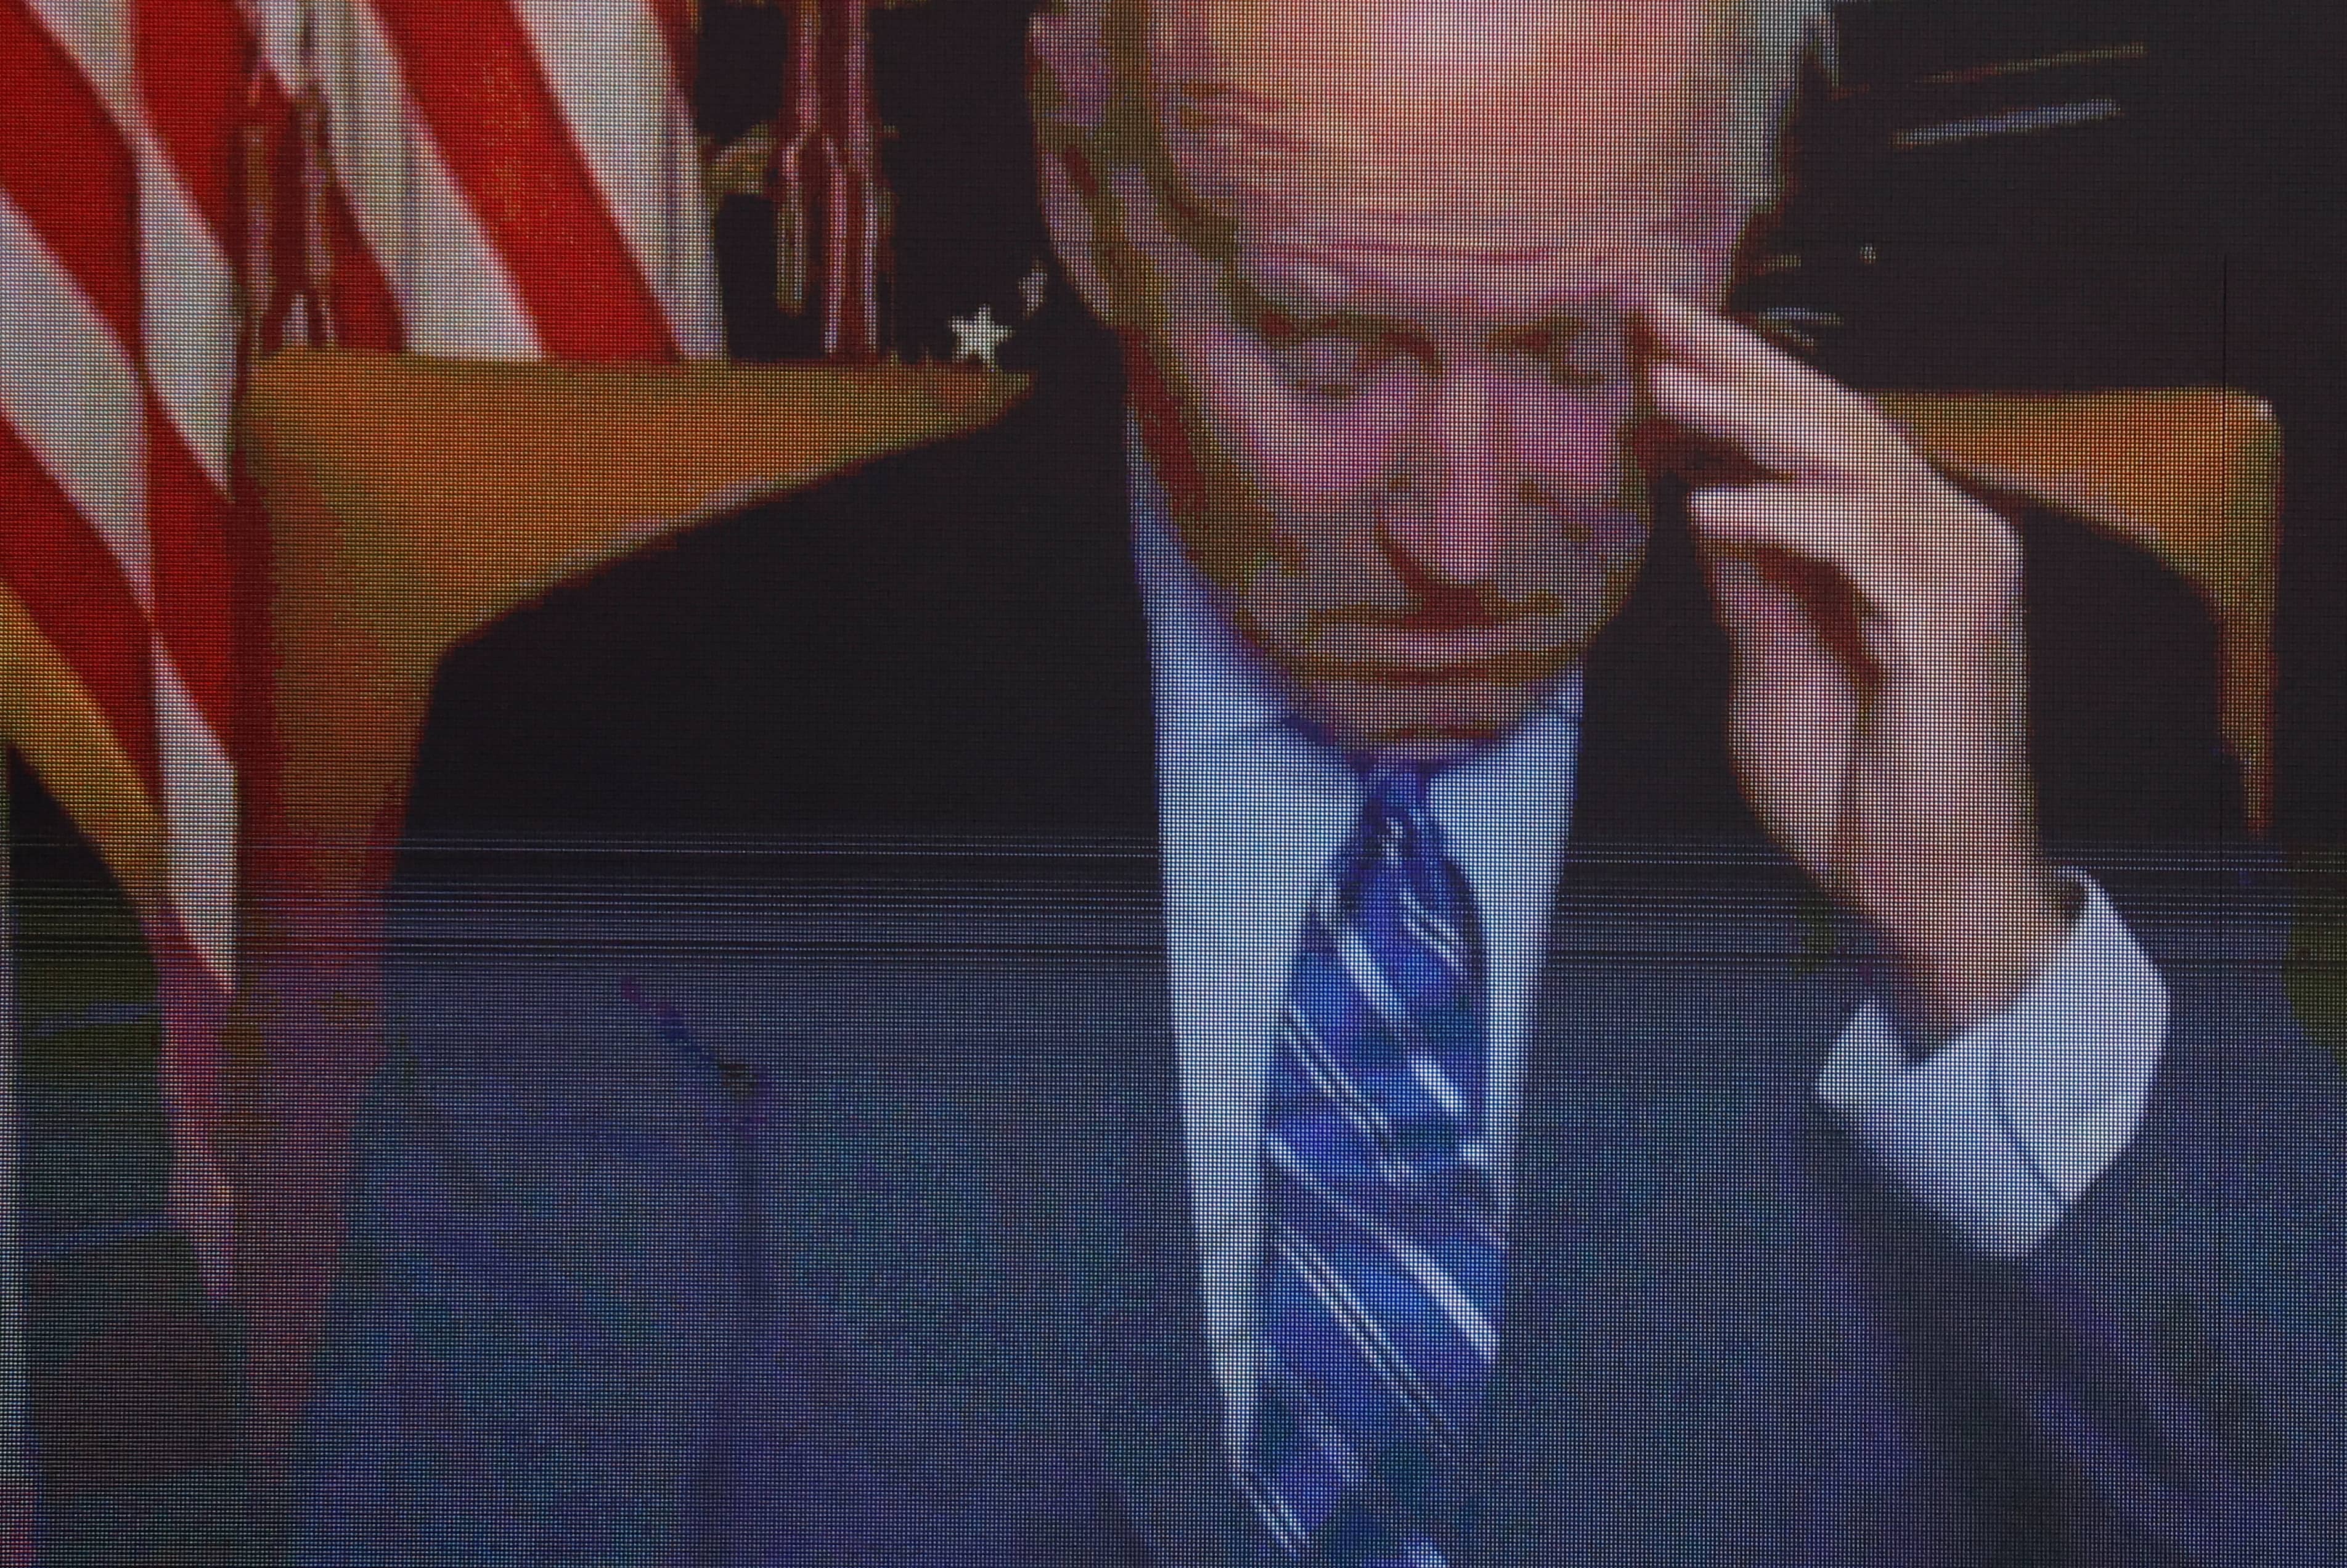 u-s-president-biden-virtual-meeting-with-business-and-labor-leaders-about-the-chips-act-in-washington